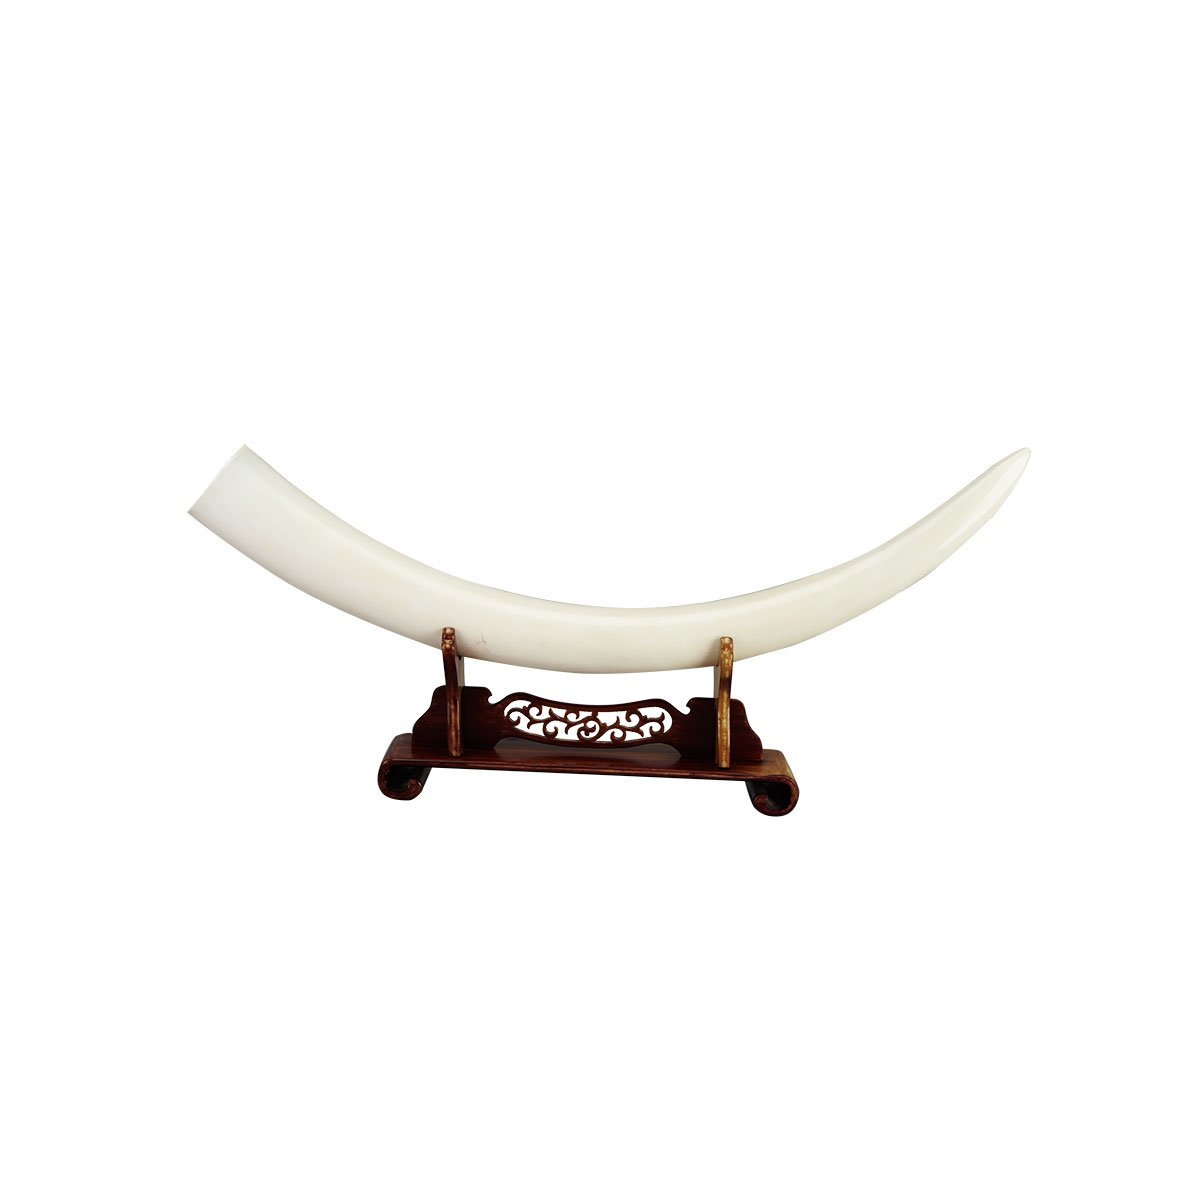 Massive Uncarved Ivory Tusk   With even